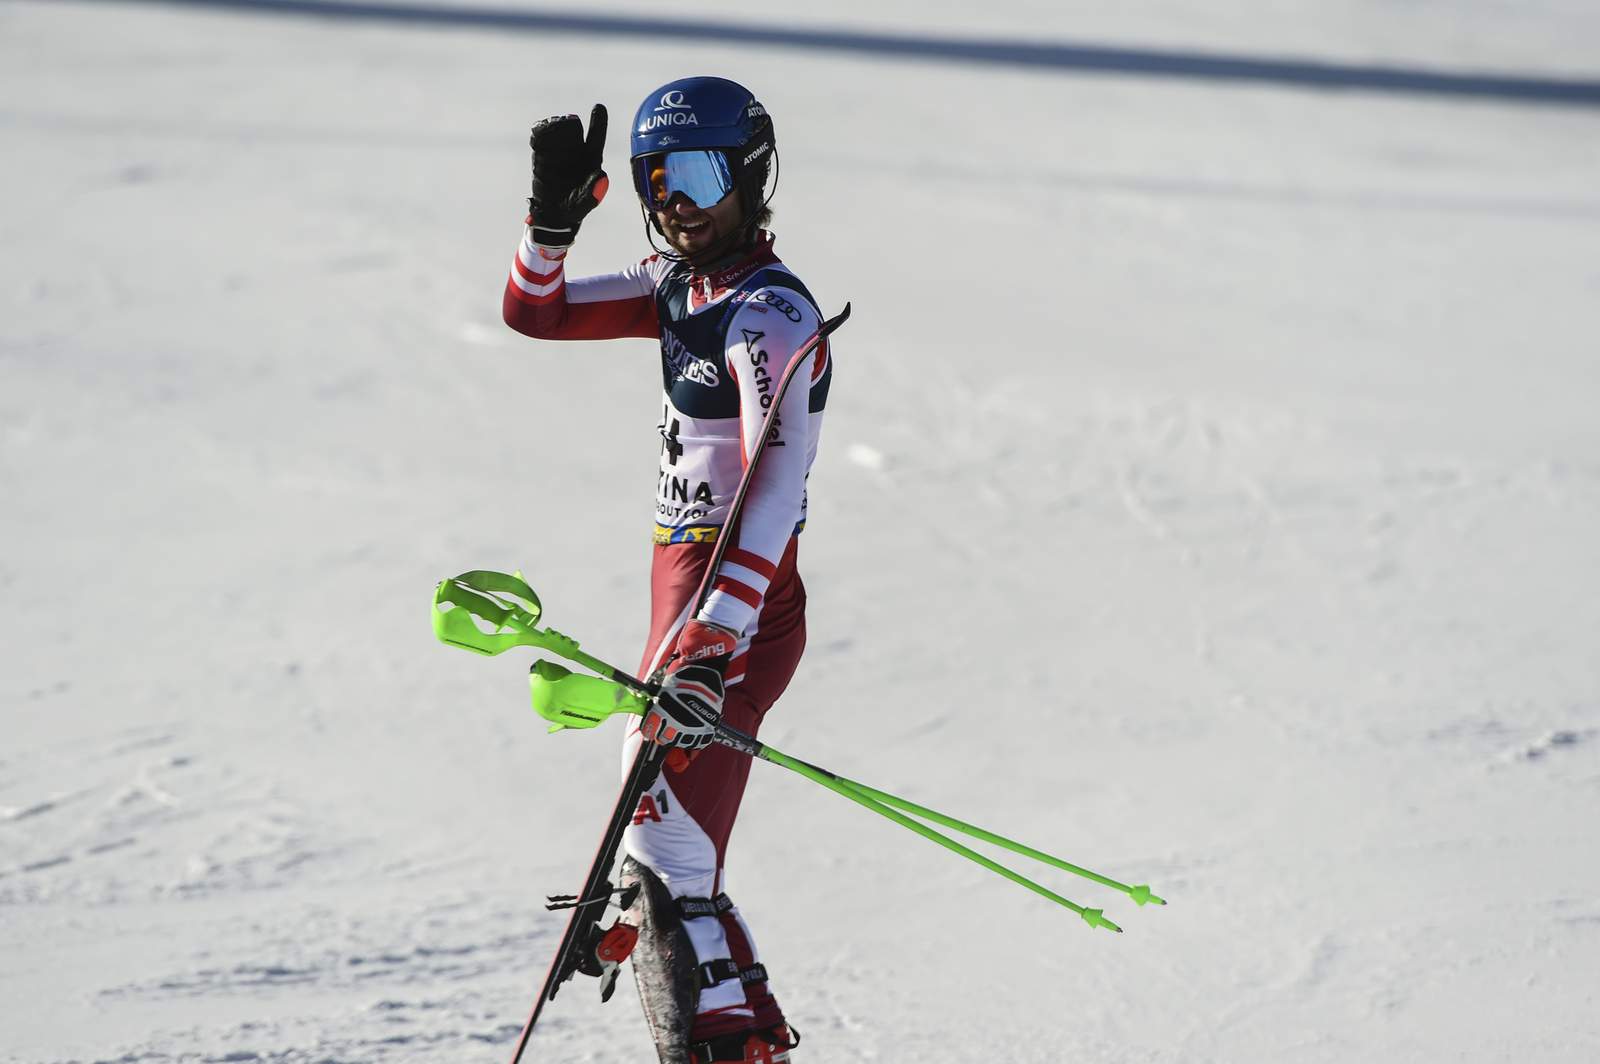 The Latest: Schwarz wins combined for Austria's 3rd gold